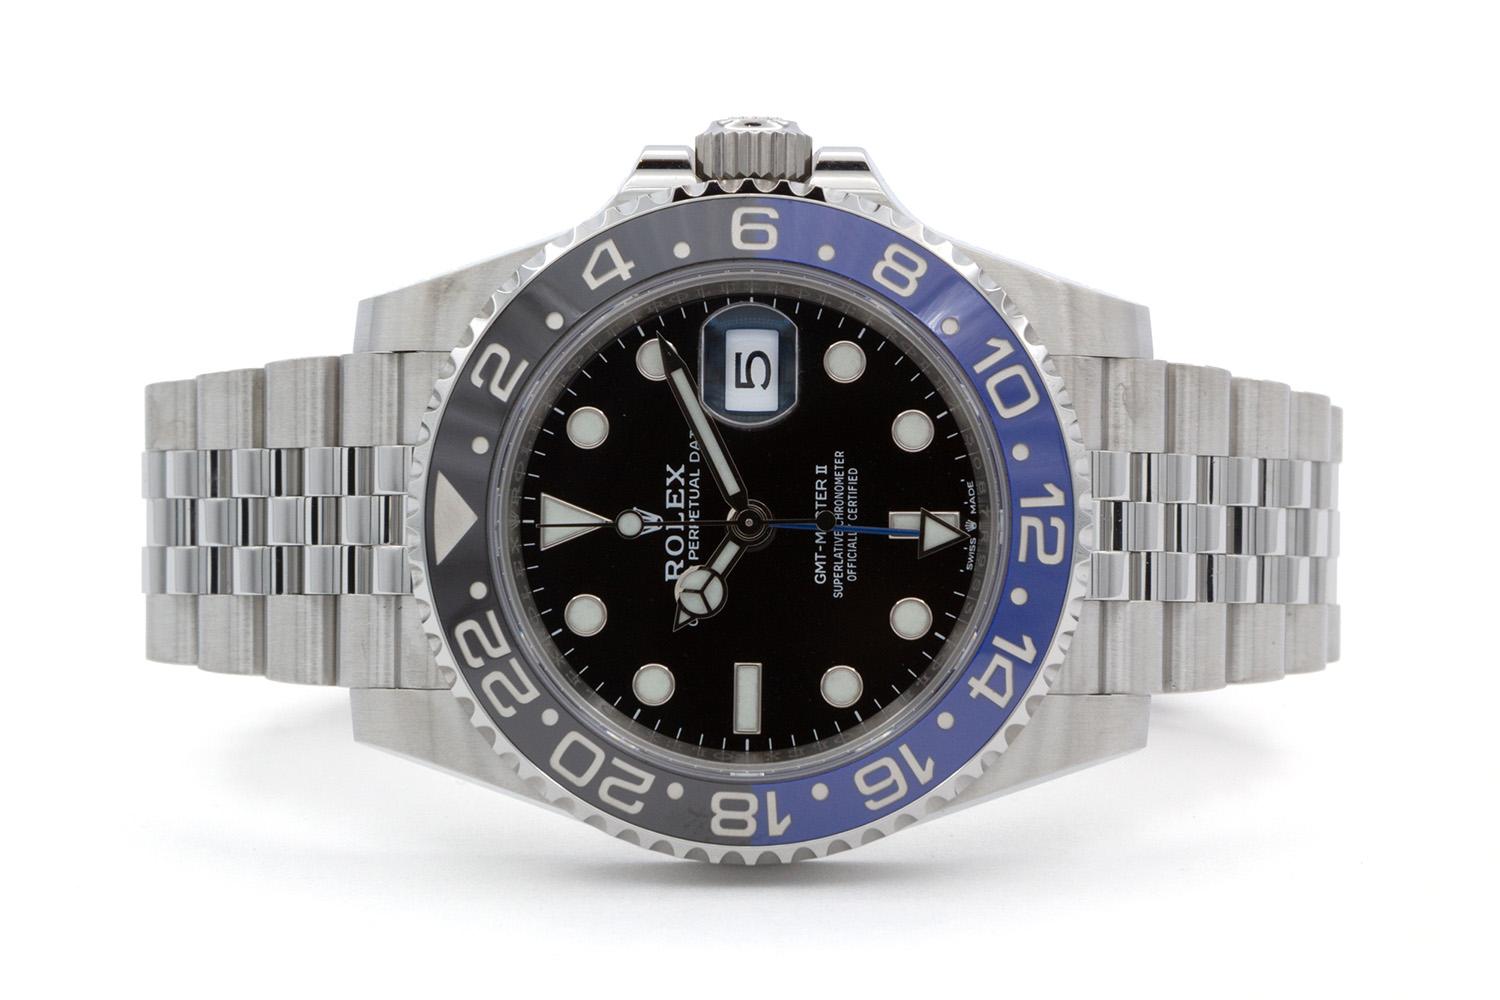 We are pleased to offer this excellent condition June 2021 Rolex Mens Stainless Steel GMT Master II 126710BLNR “Batman” 